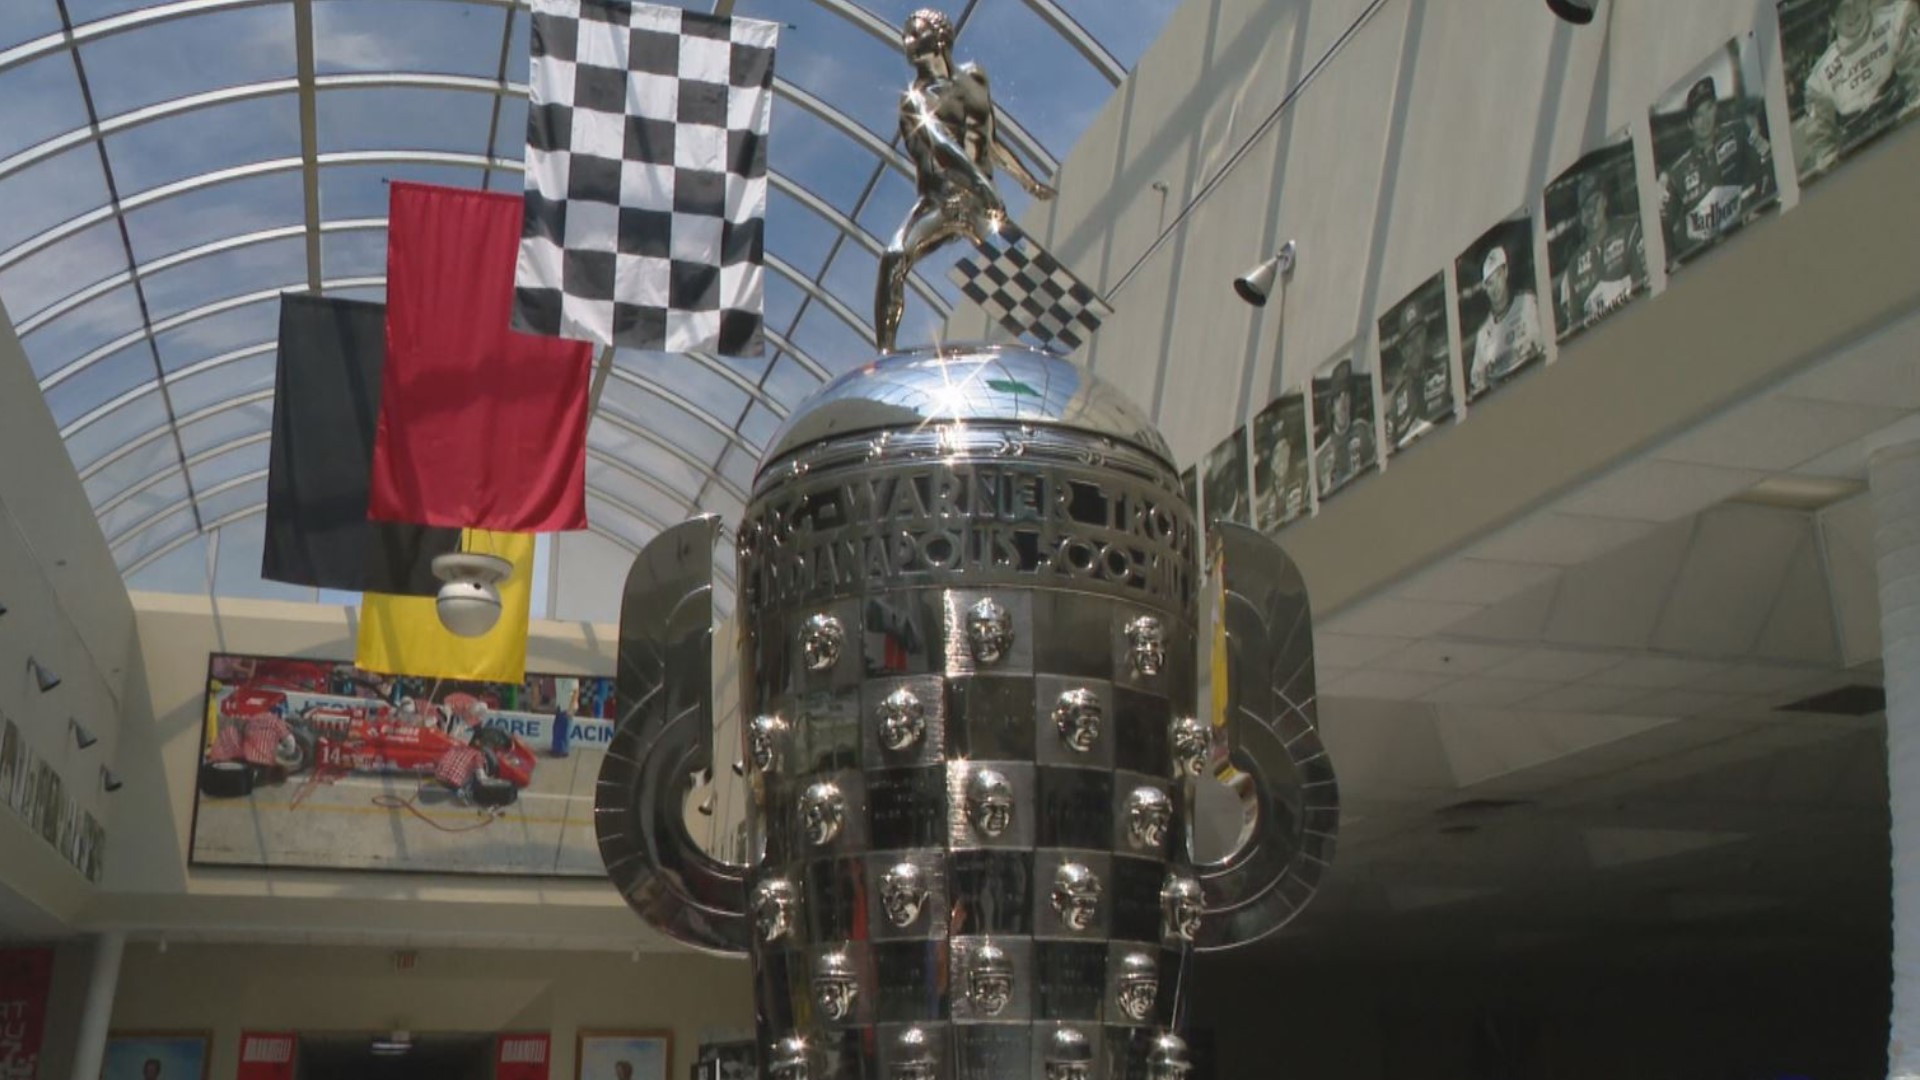 Why are there 106 faces on the Borg-Warner Trophy if this will be the 104th running of the Indianapolis 500 and other answers about the iconic trophy.